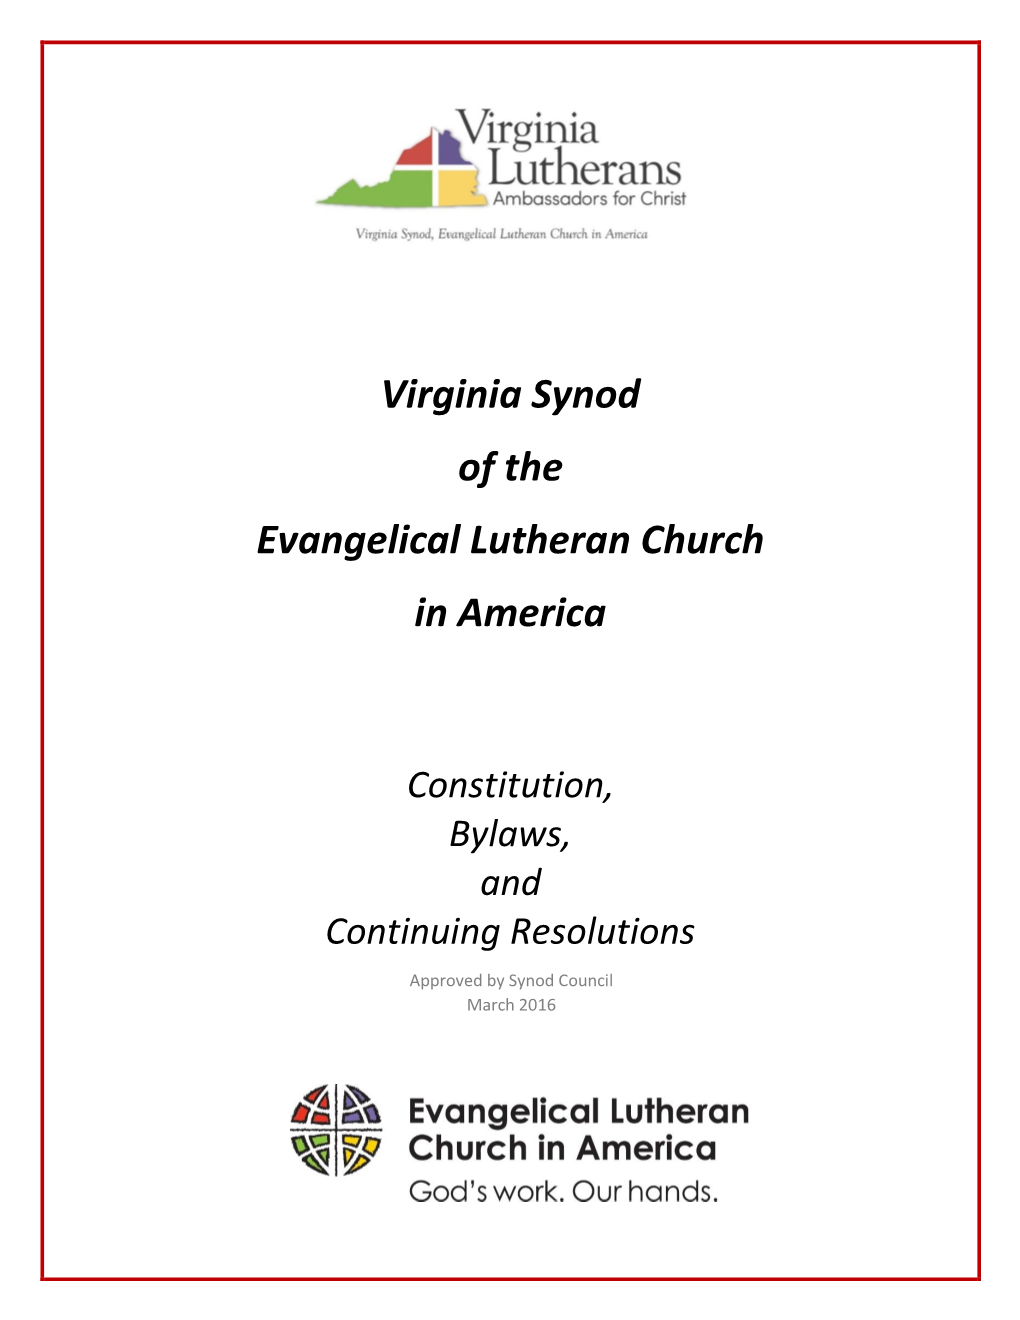 Virginia Synod of the Evangelical Lutheran Church in America